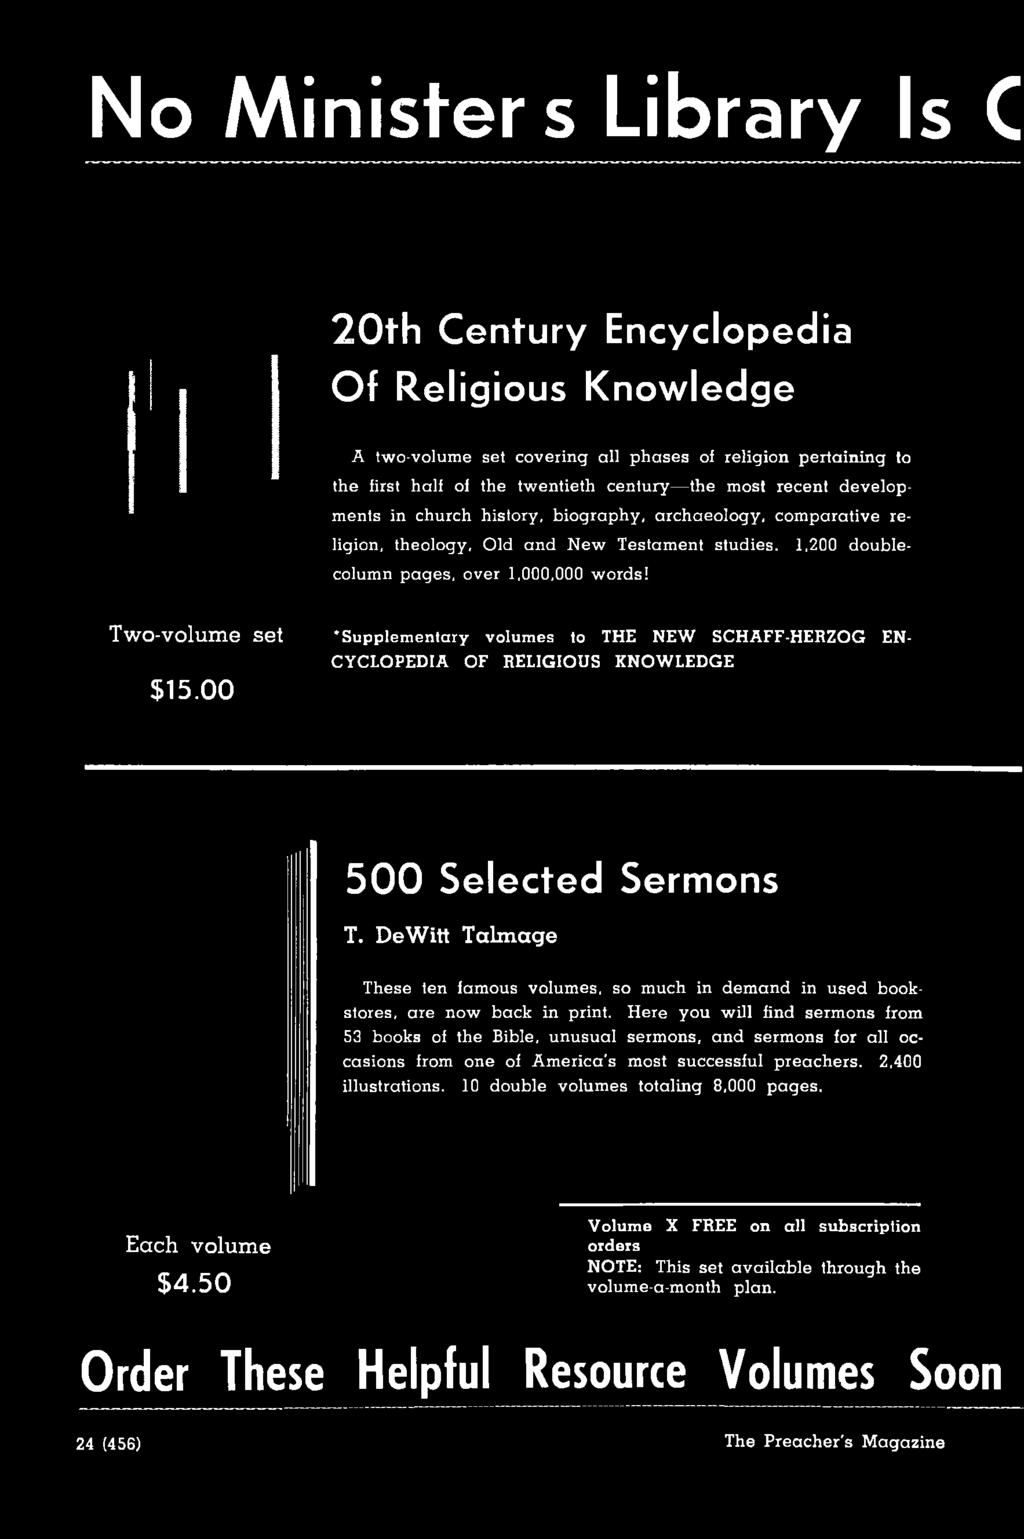 00 Supplementary volumes to THE NEW SCHAFF-HERZOG EN CYCLOPEDIA OF RELIGIOUS KNOWLEDGE 5 0 0 Selected Sermons T.